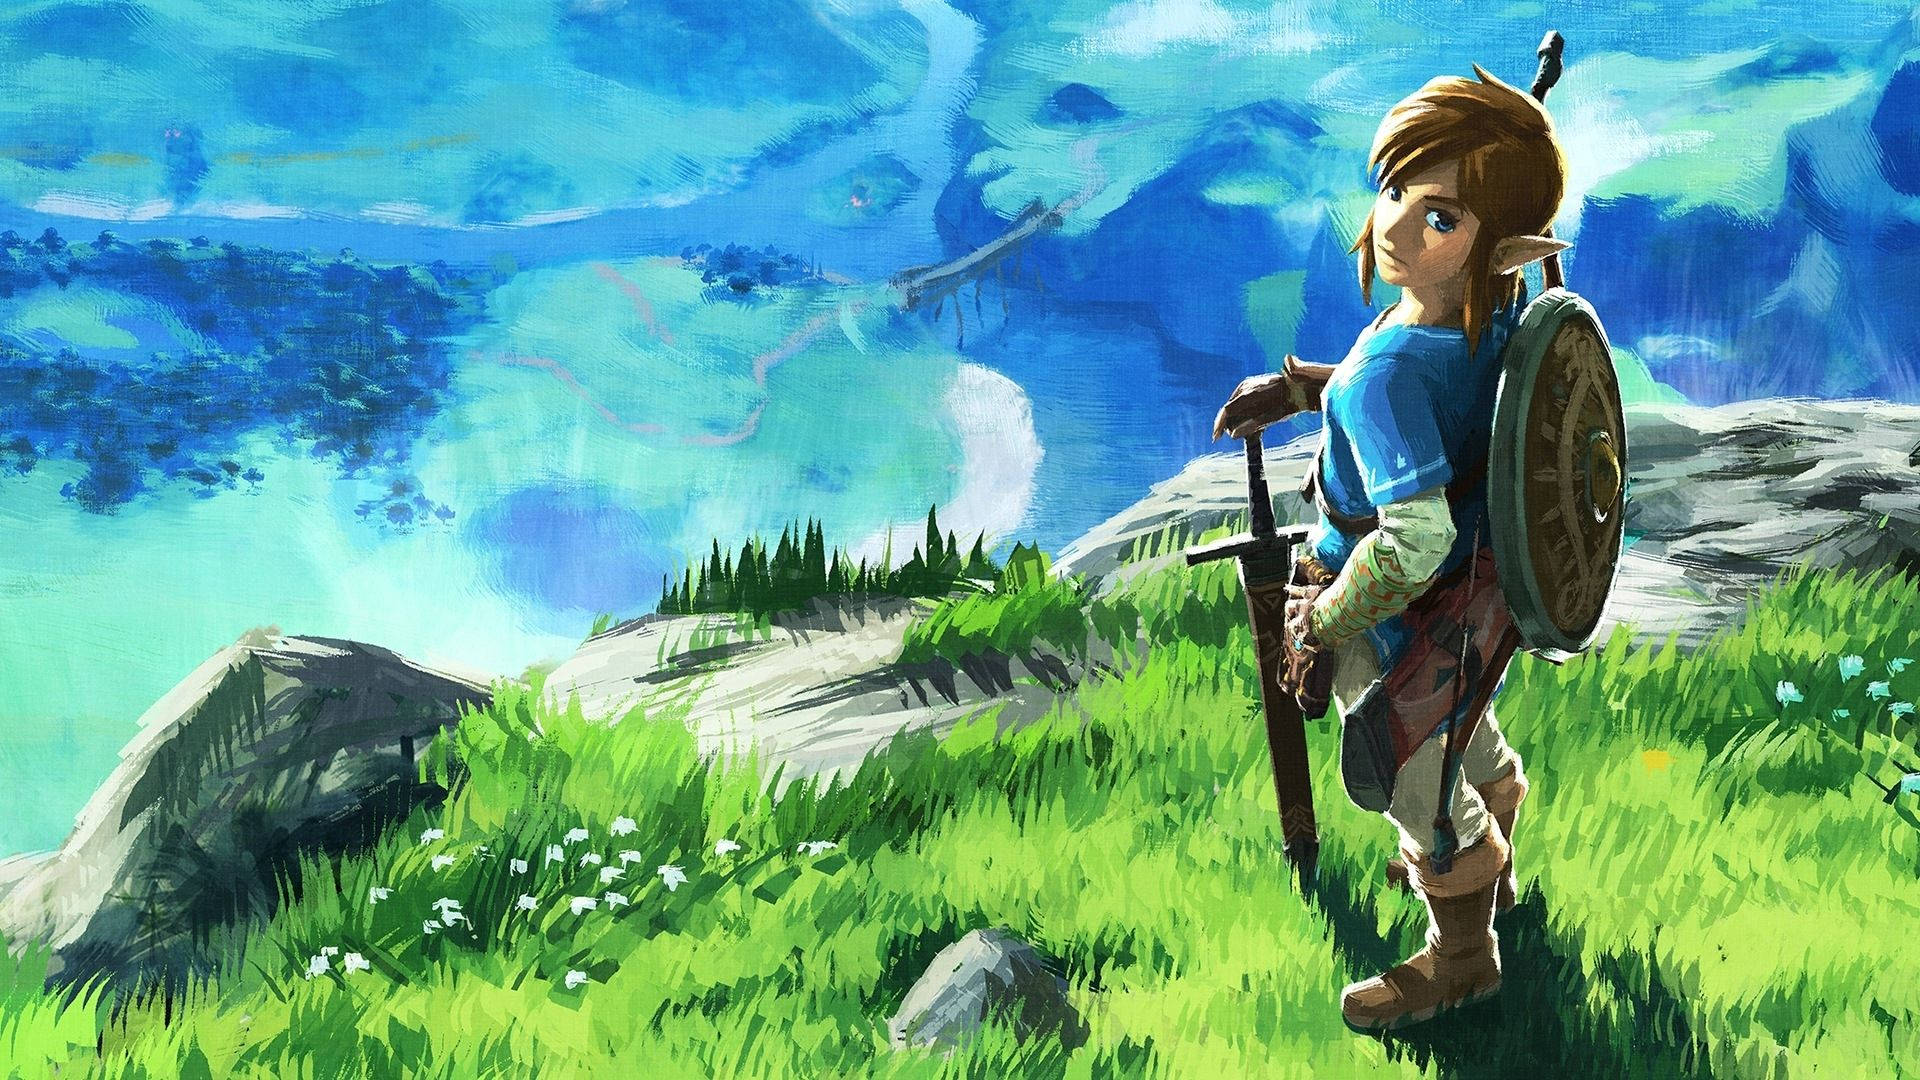 Link takes on the wild, unknown world of Breath Of The Wild. Wallpaper